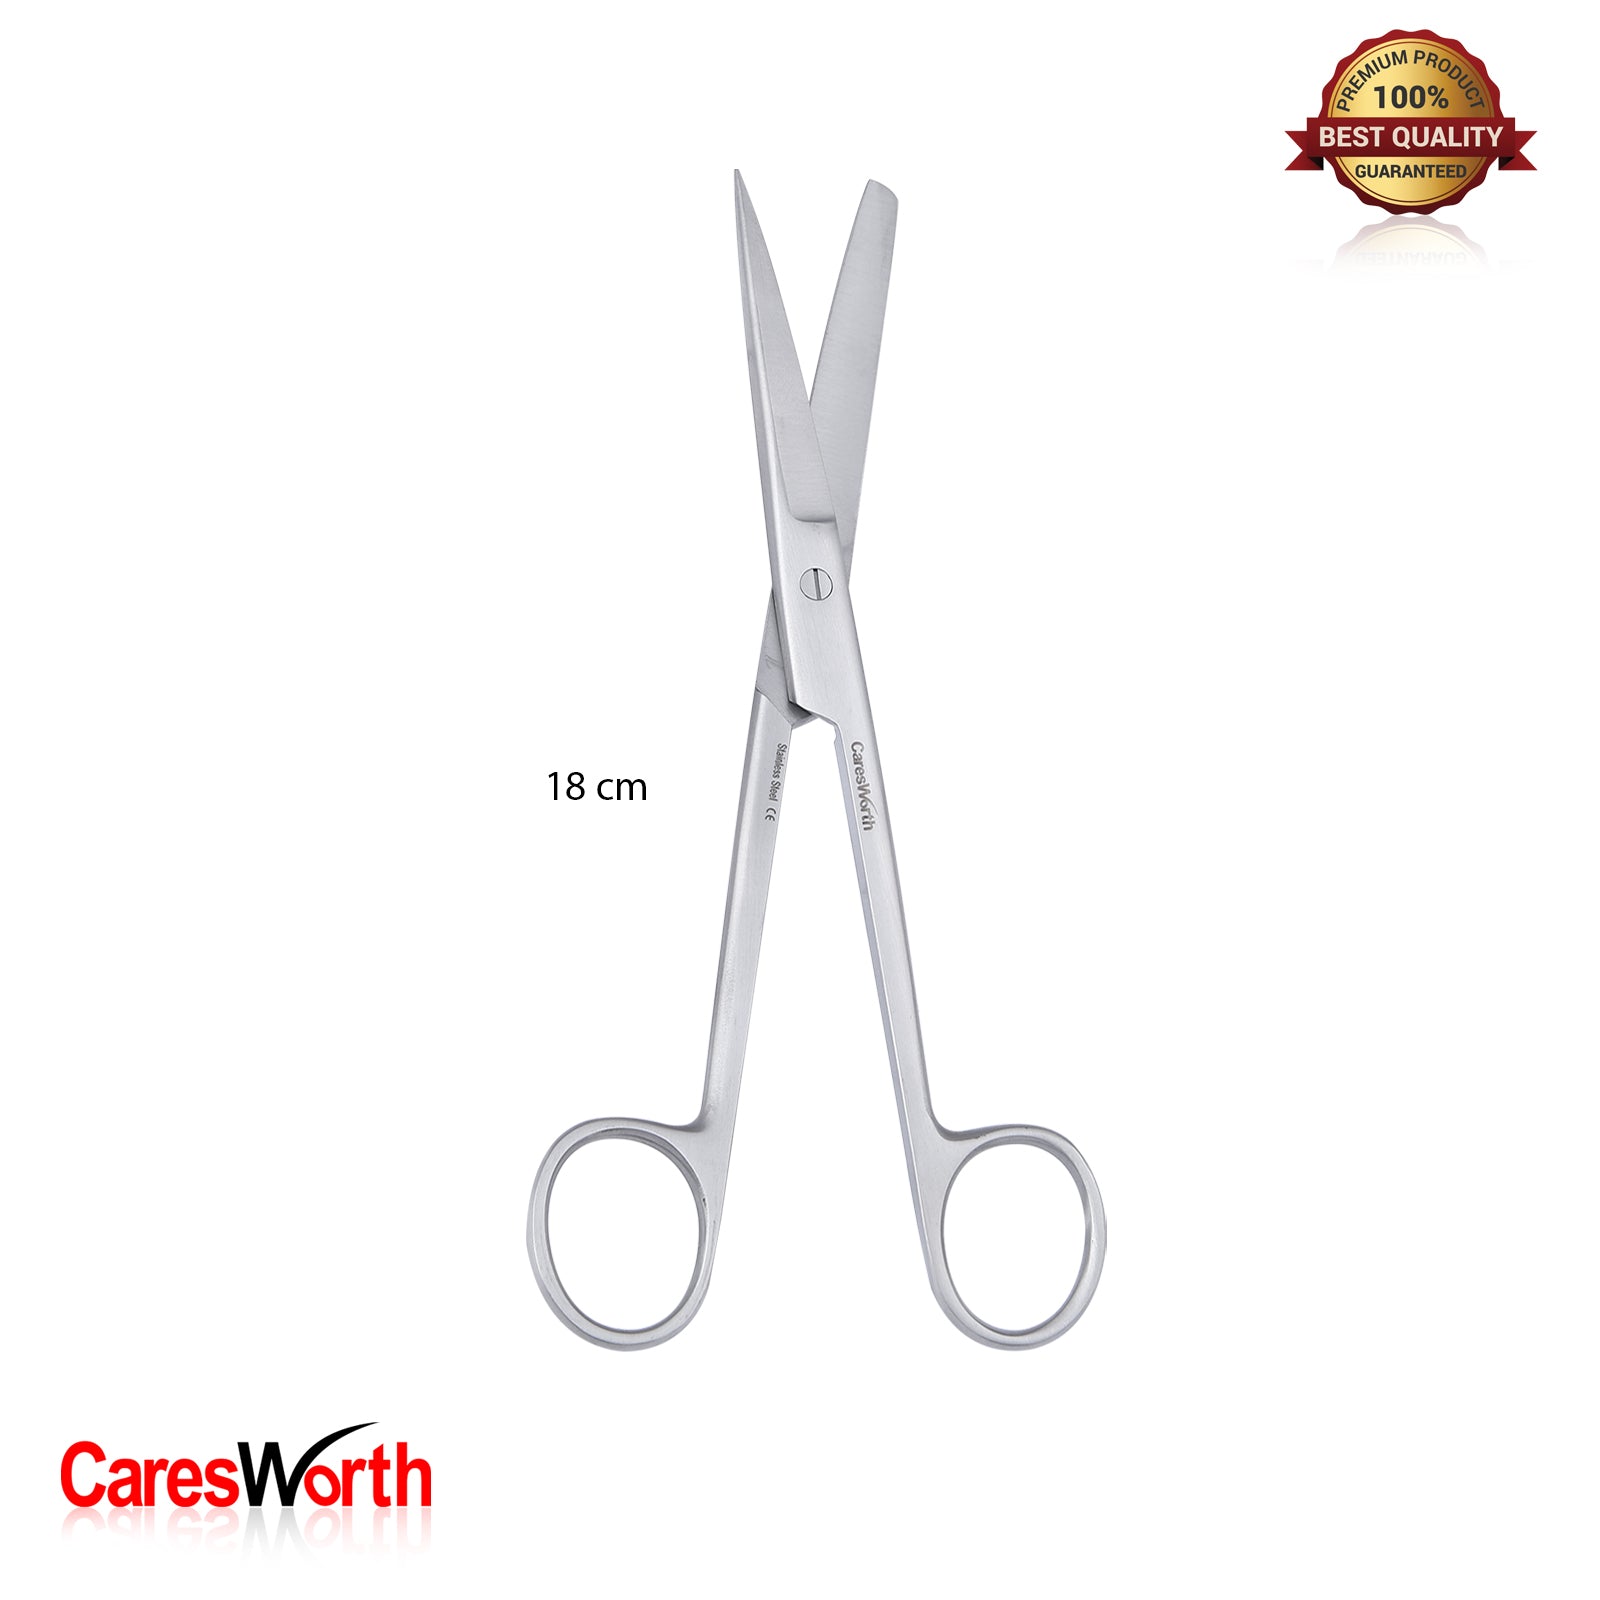 Operating/Dressing Scissors Sharp/Blunt Surgical Stainless Steel - 3 Sizes